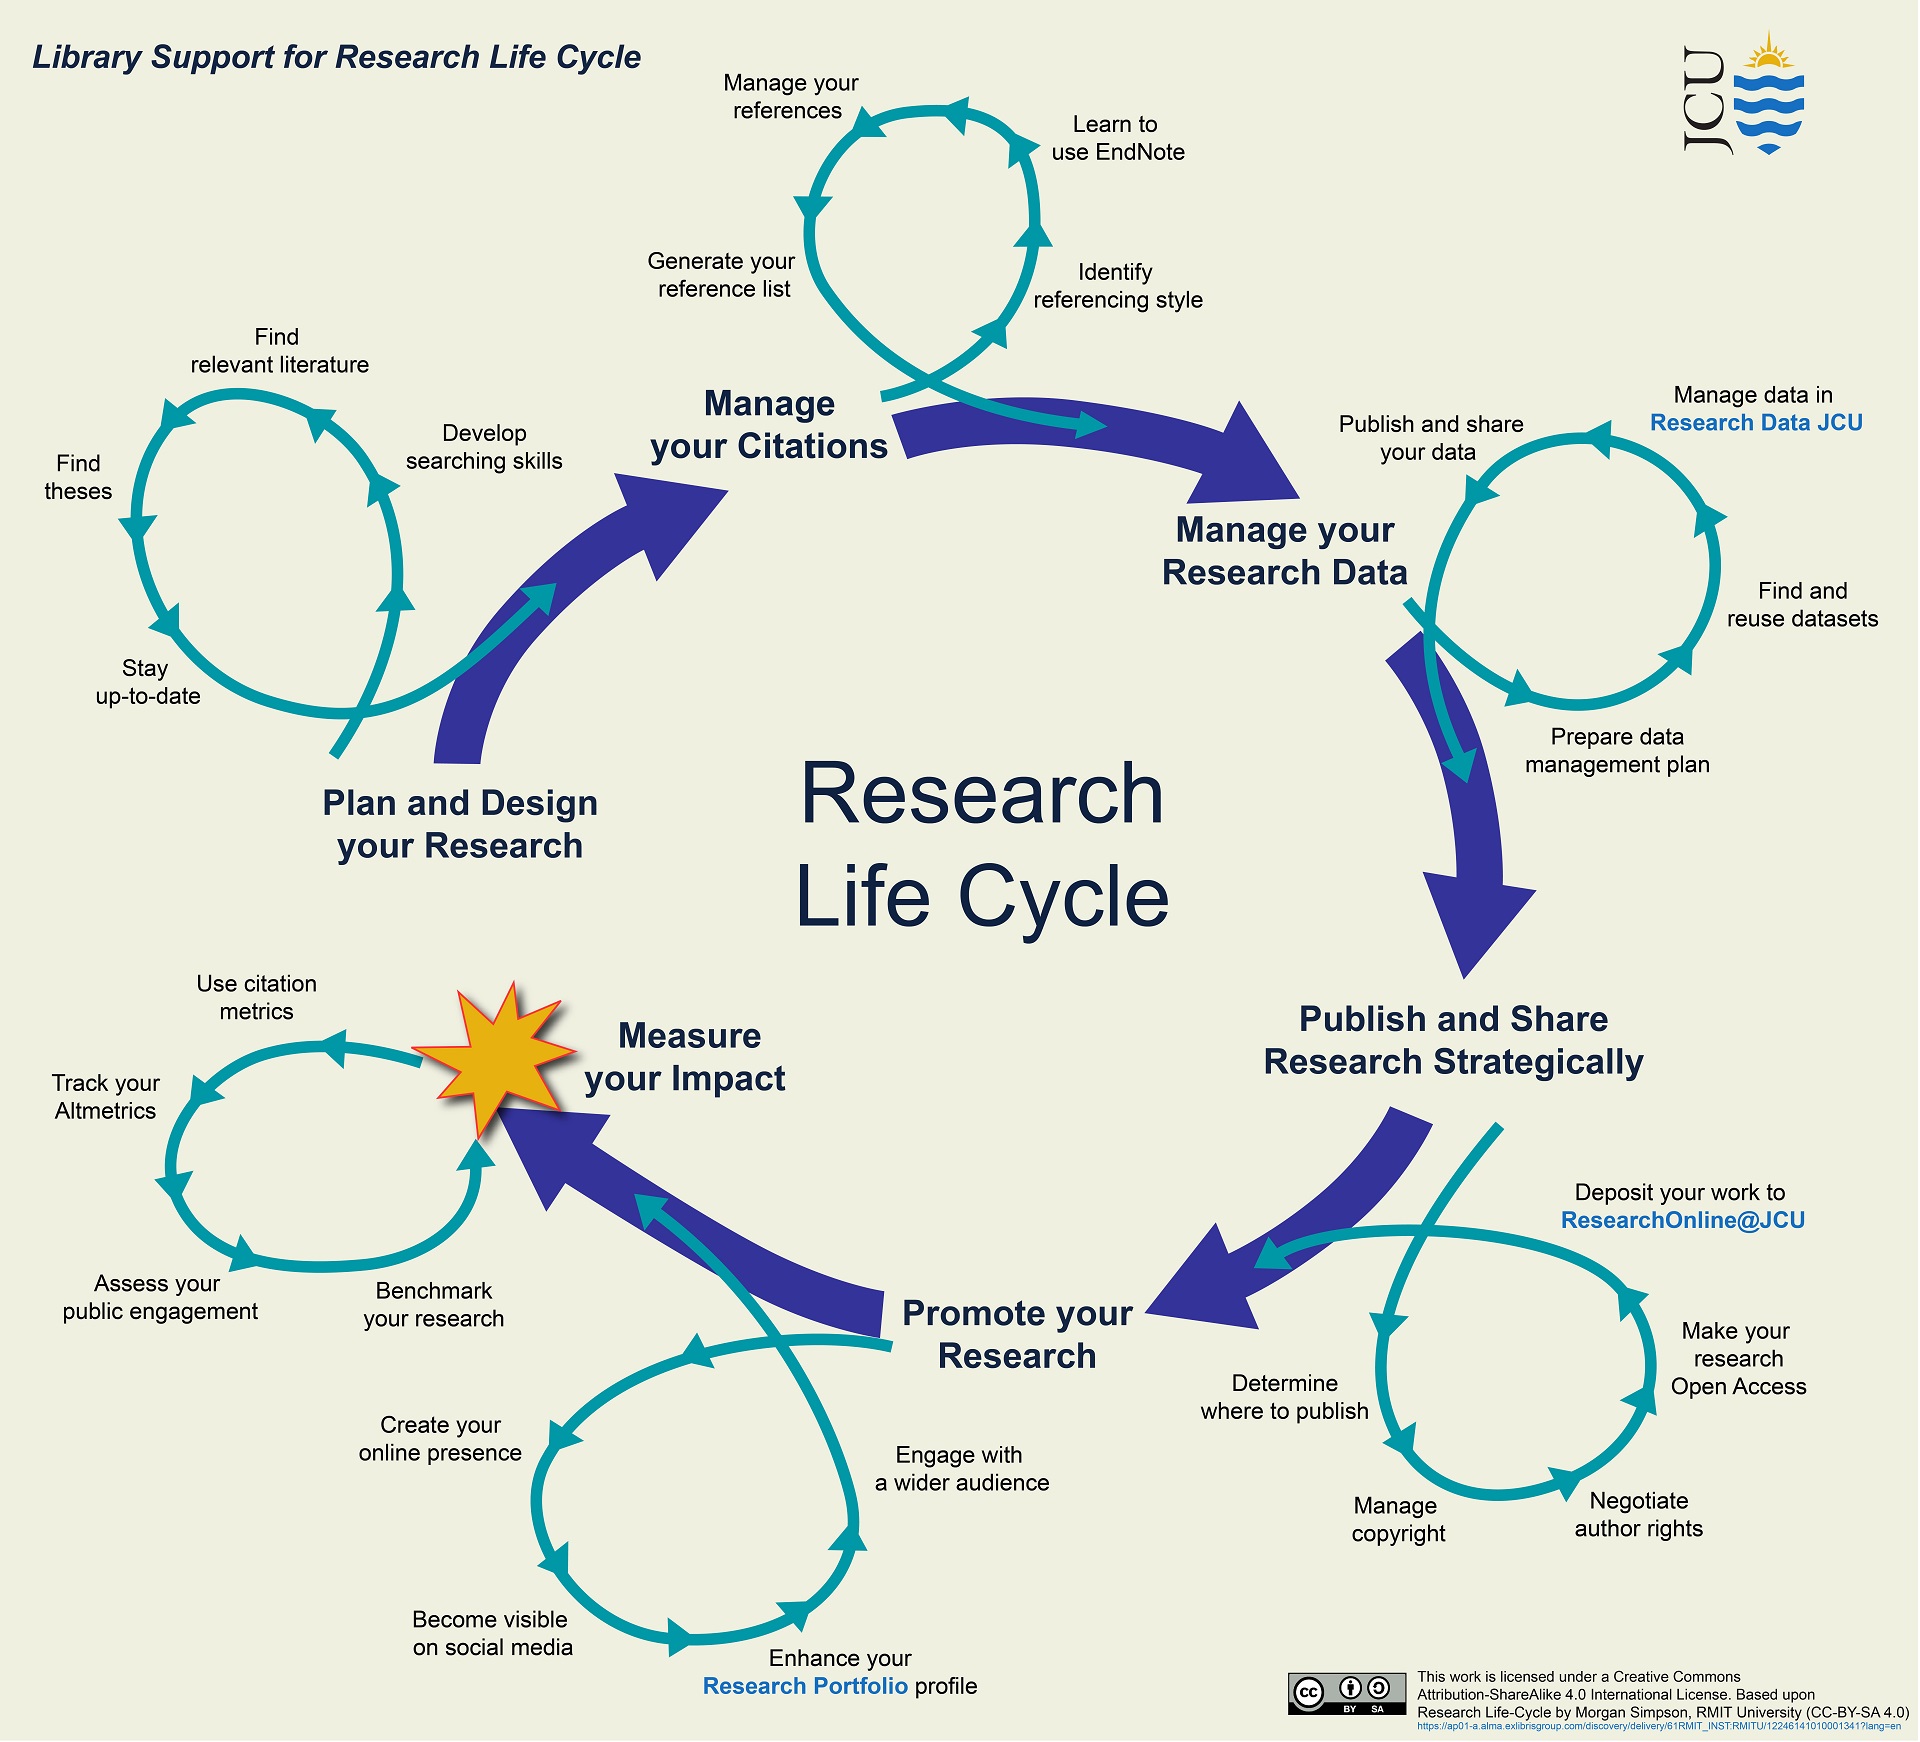 Illustration of the Research Life Cycle